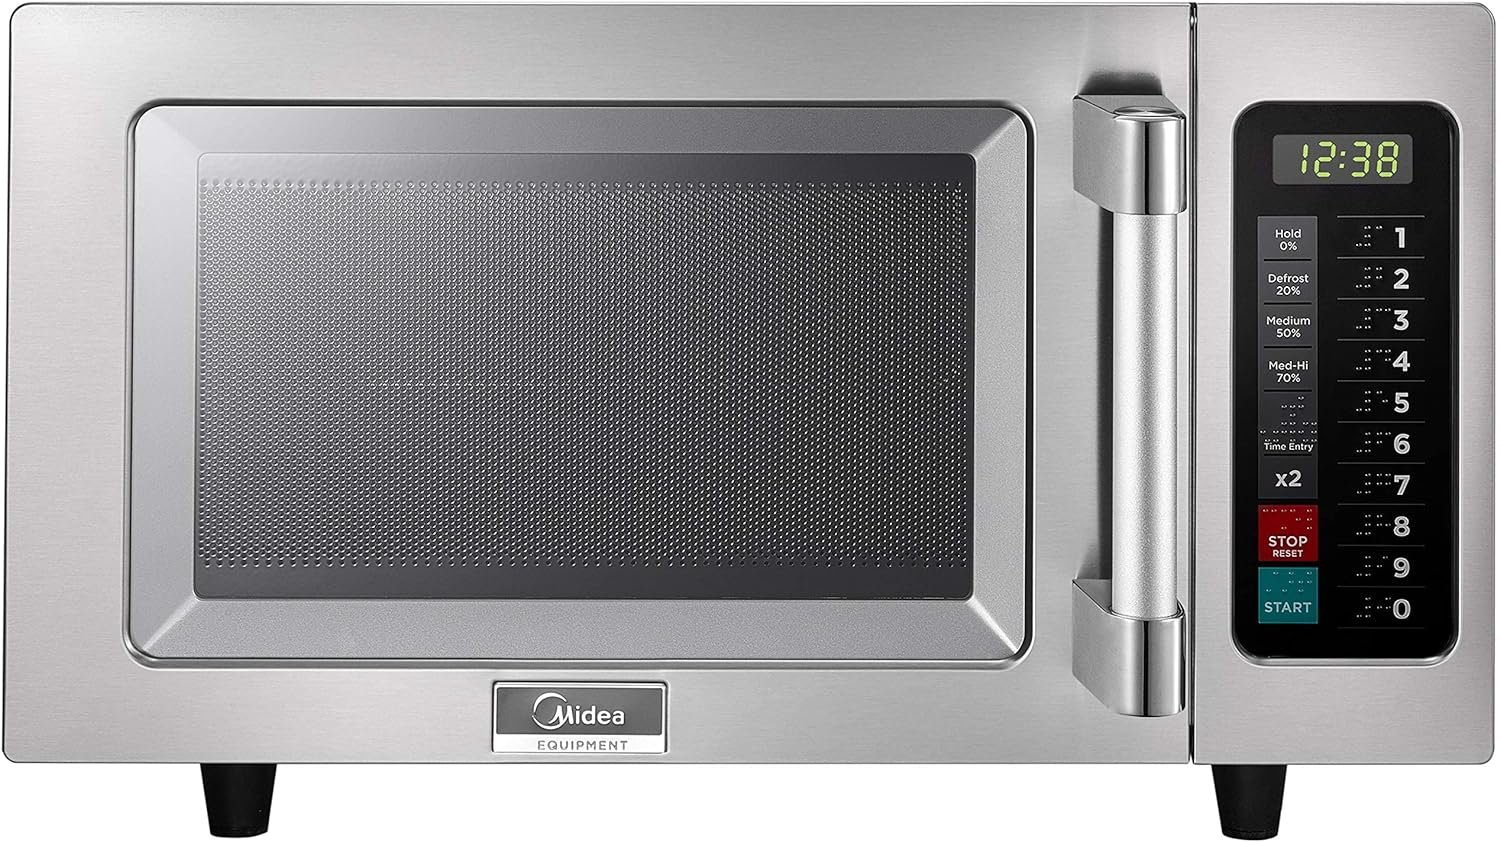 Midea Equipment 1025F1A Countertop Commercial Microwave Oven with Touch Control, 1000W, Stainless Steel.9 CuFt